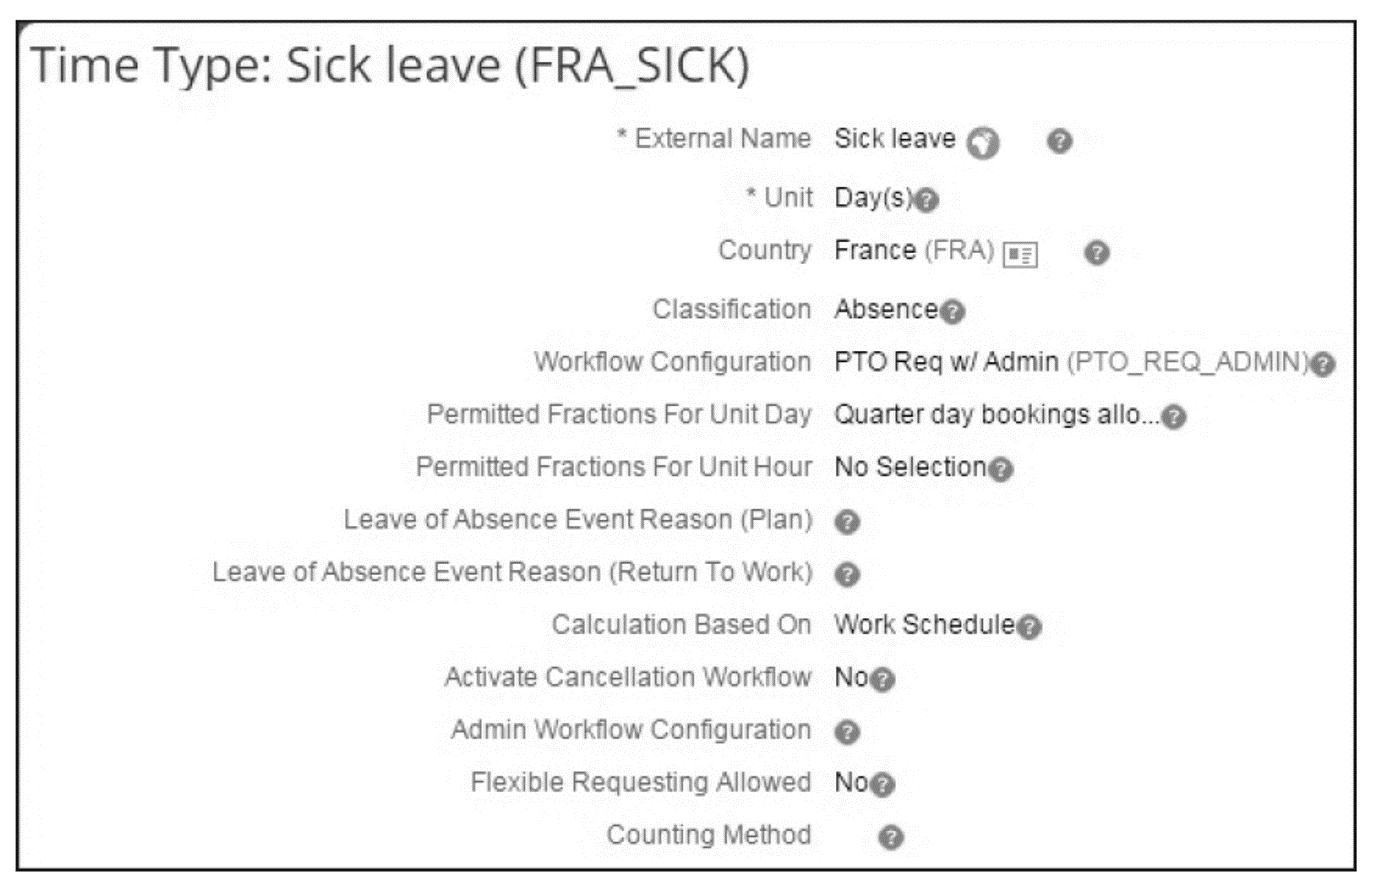 Time Type for Sick Leave for France